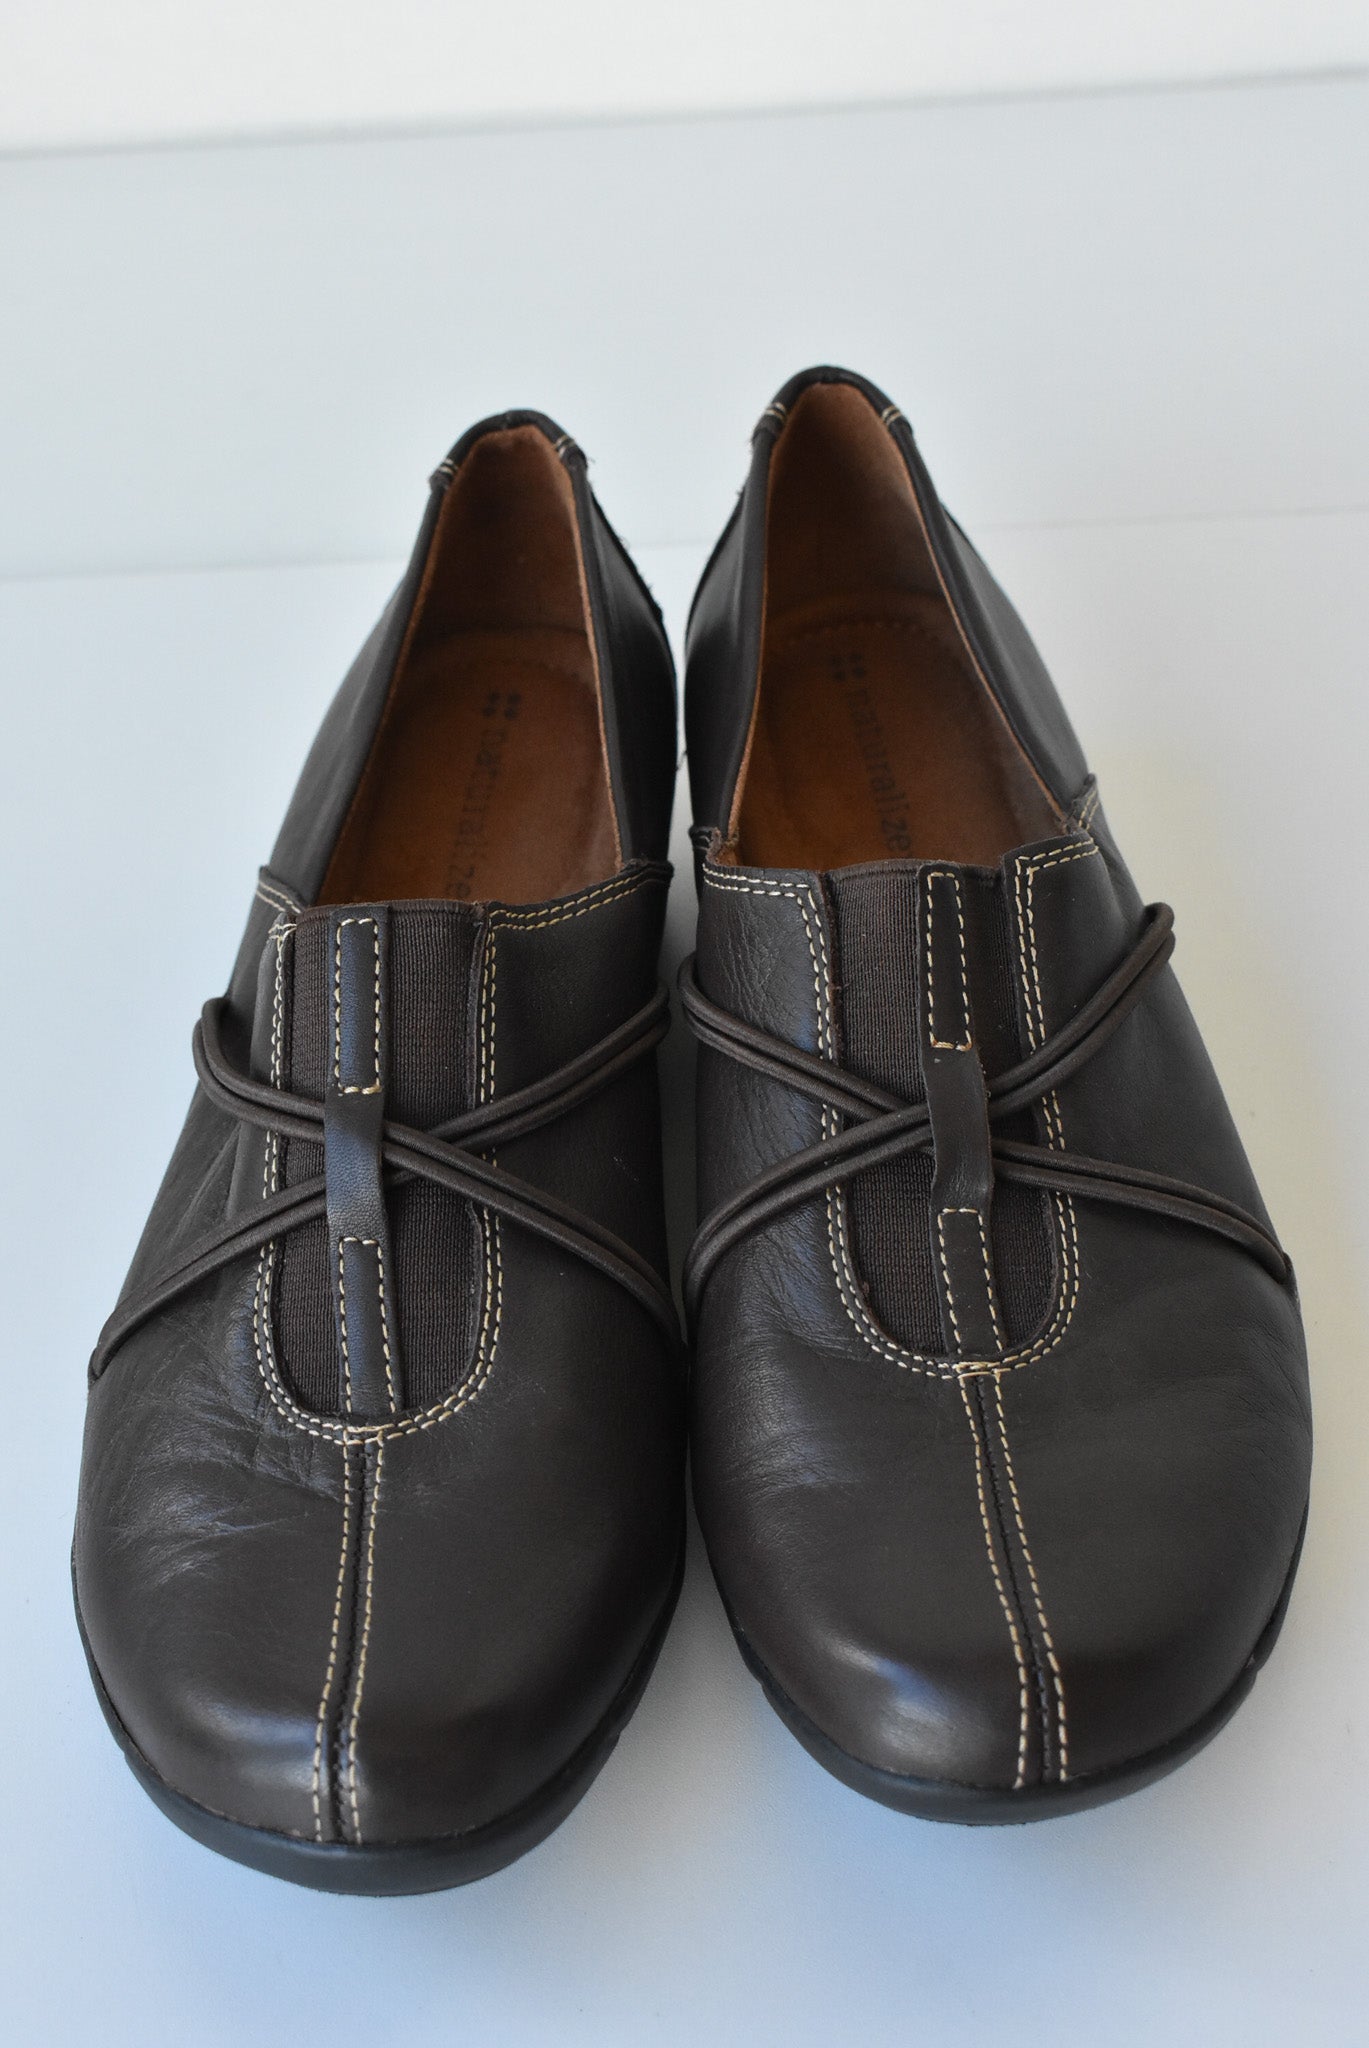 Naturalizer Brown leather shoes, 41